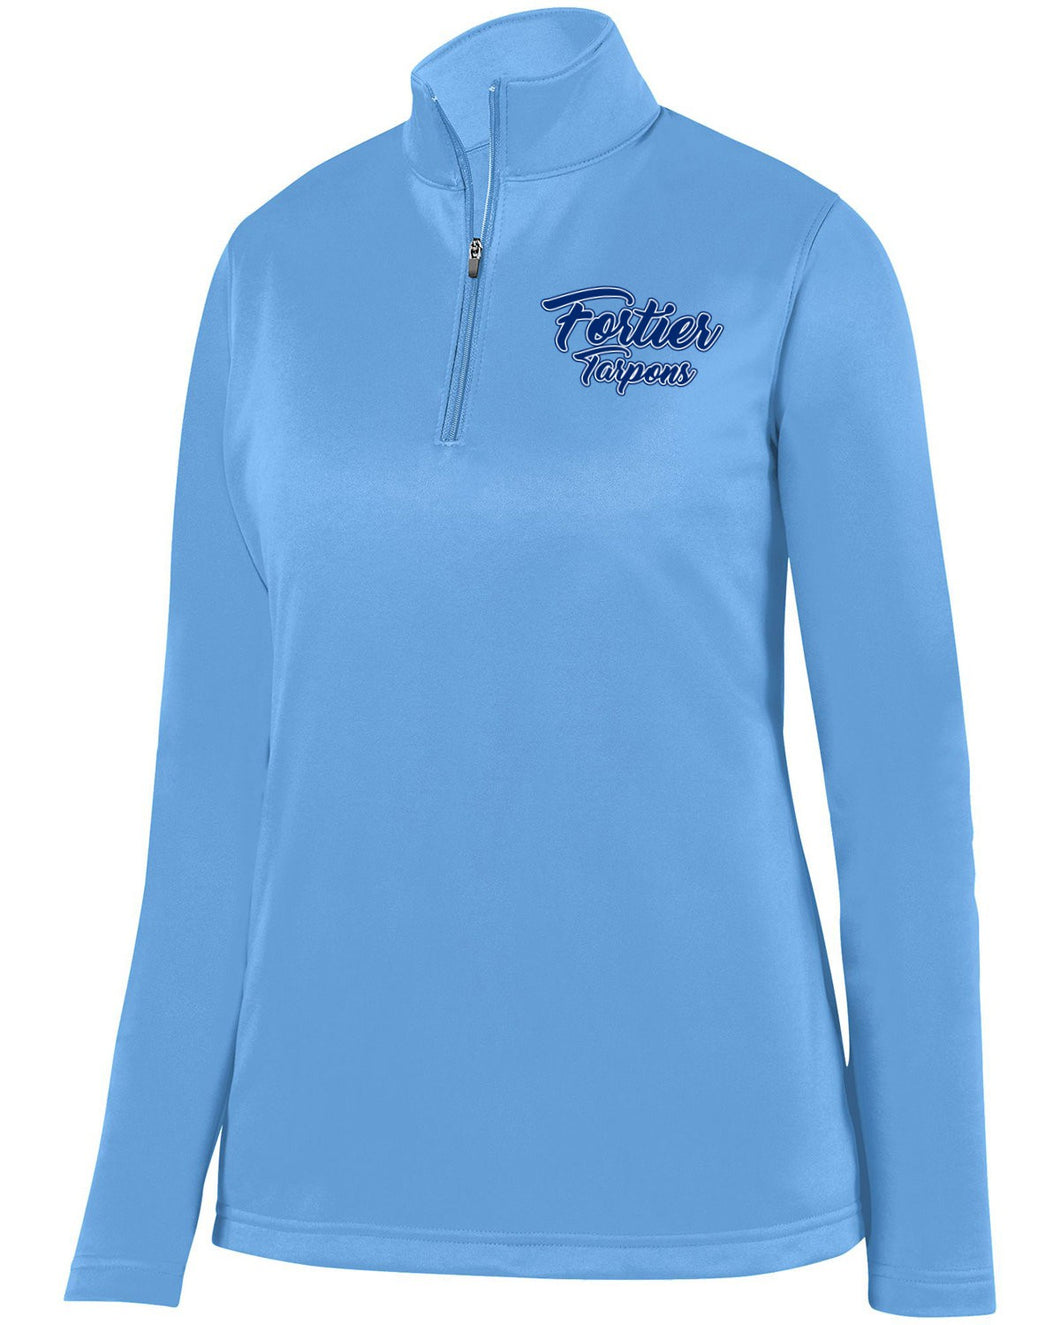 AG5509 Alcee Fortier LADIES Embroidery Dry-Fit Fleece Quarter-Zip Pullover